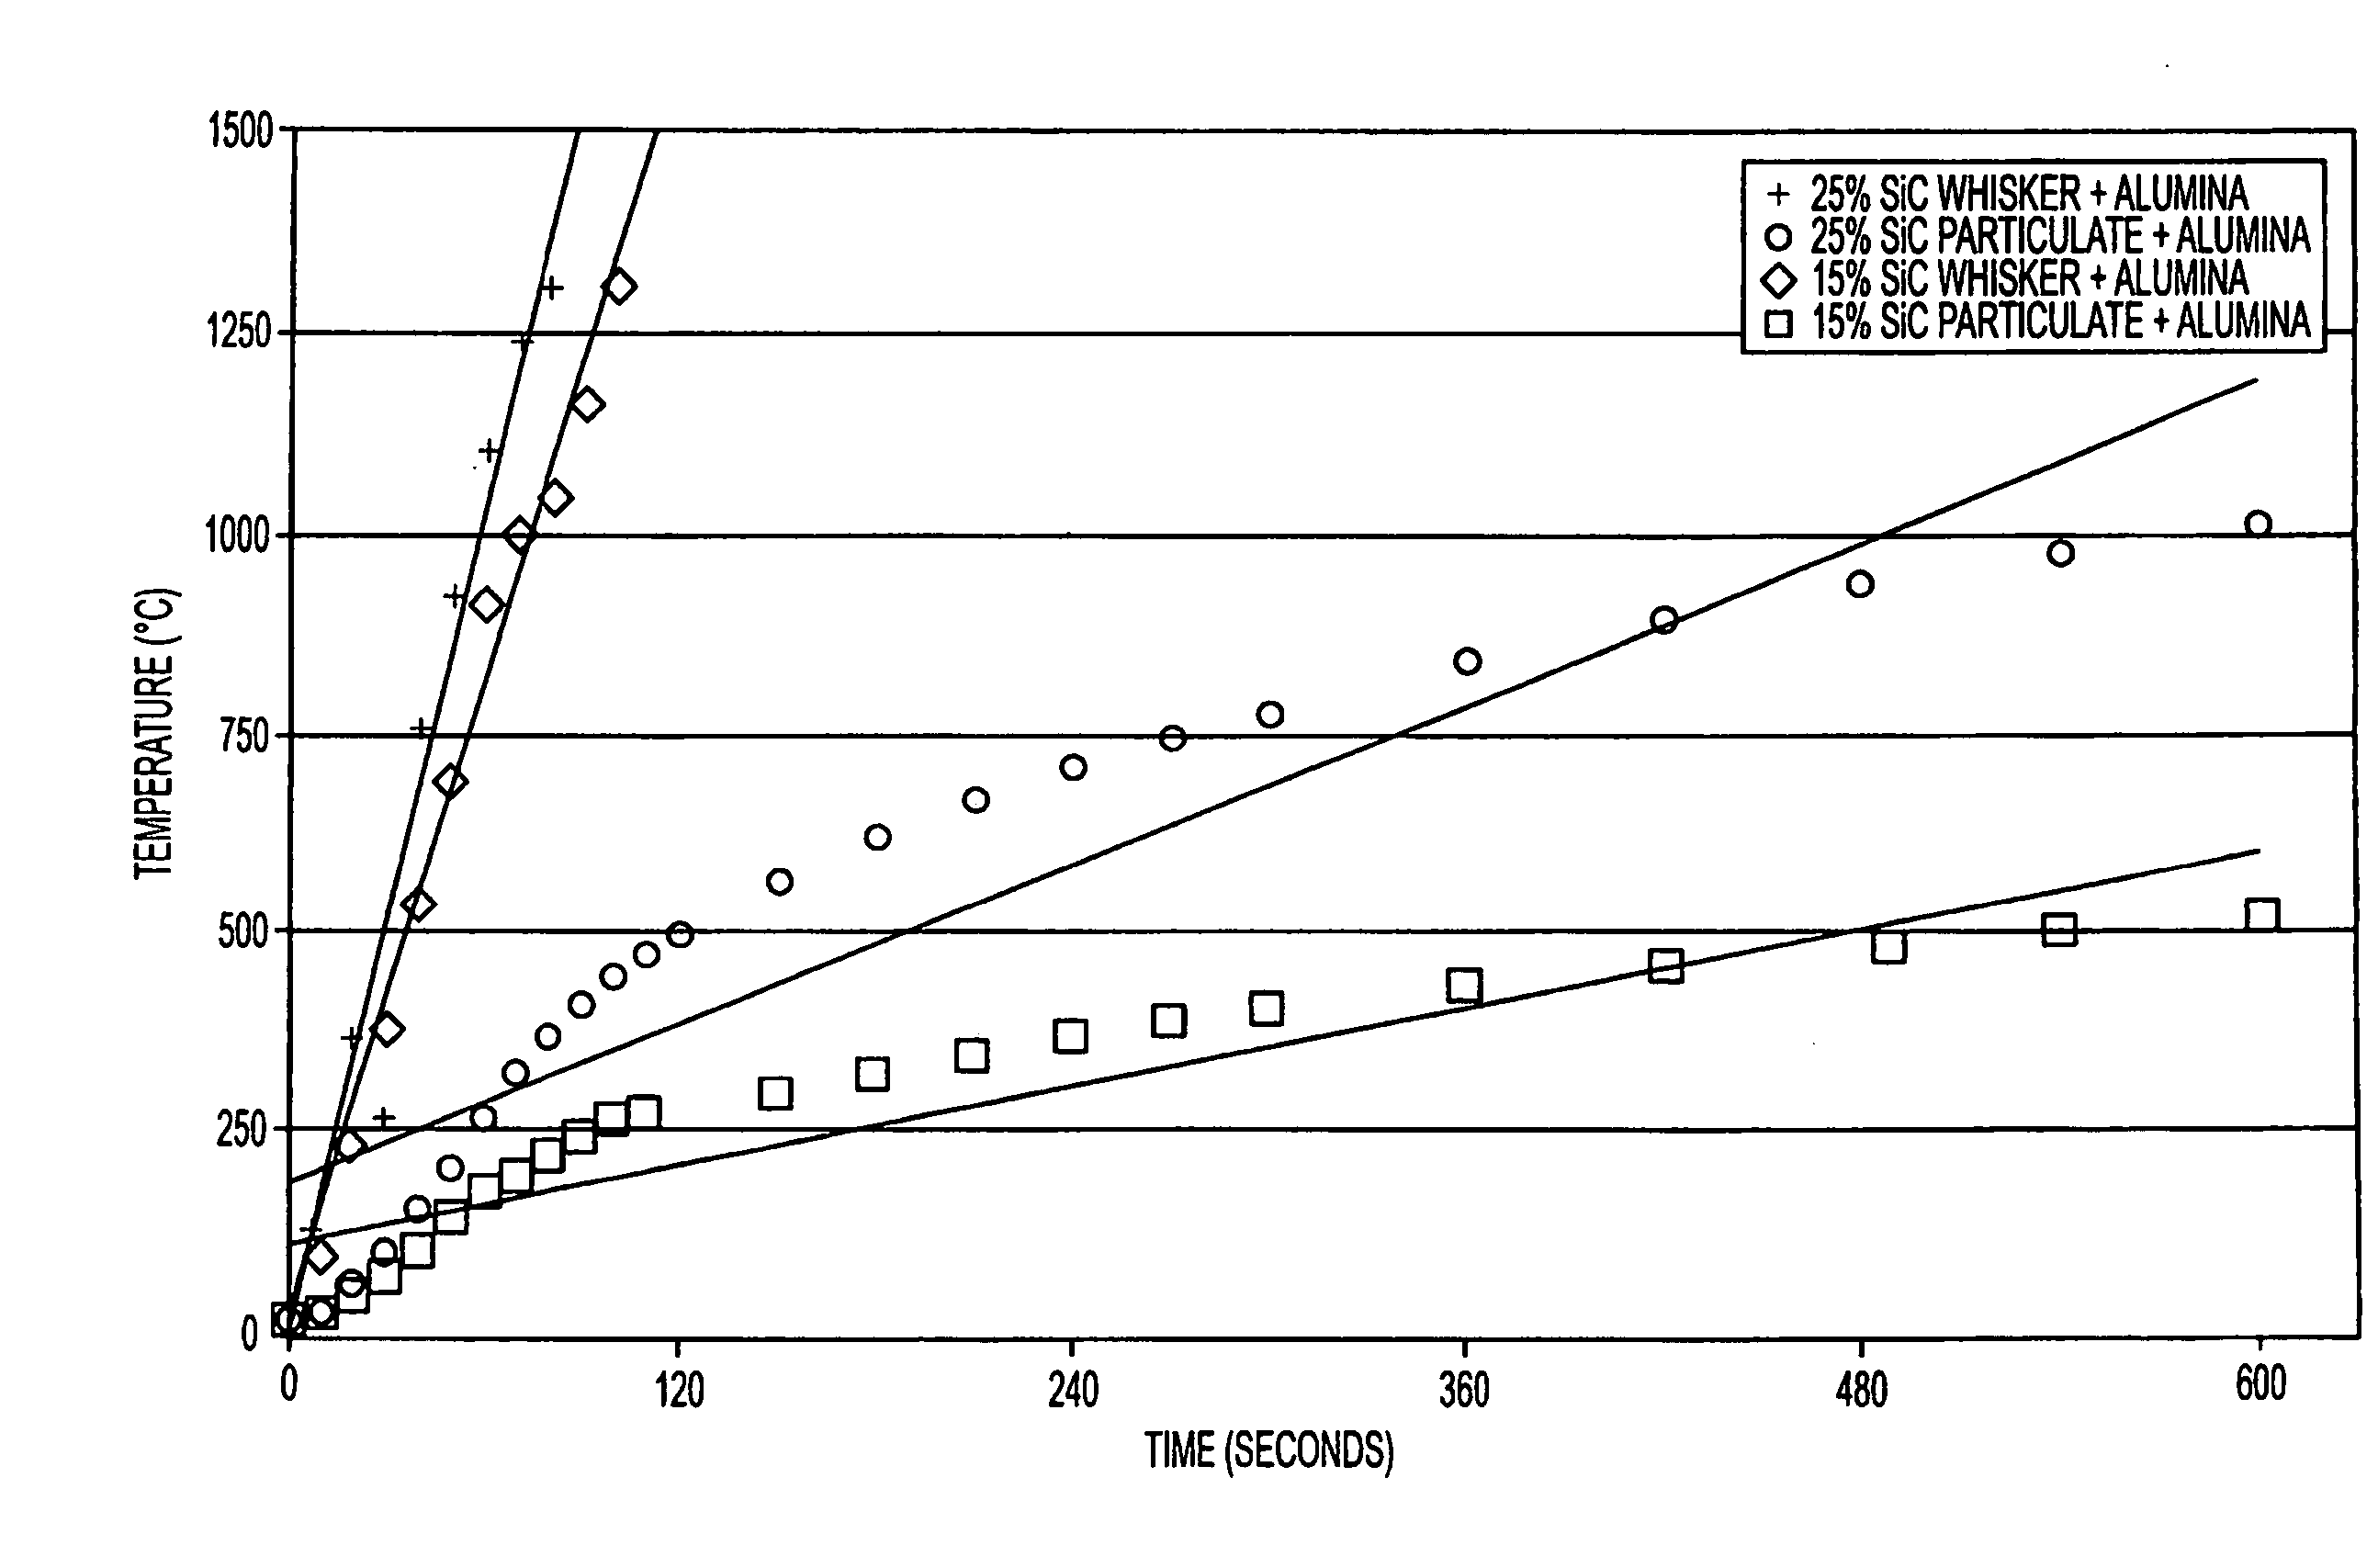 Composite materials and devices comprising single crystal silicon carbide heated by electromagnetic radiation